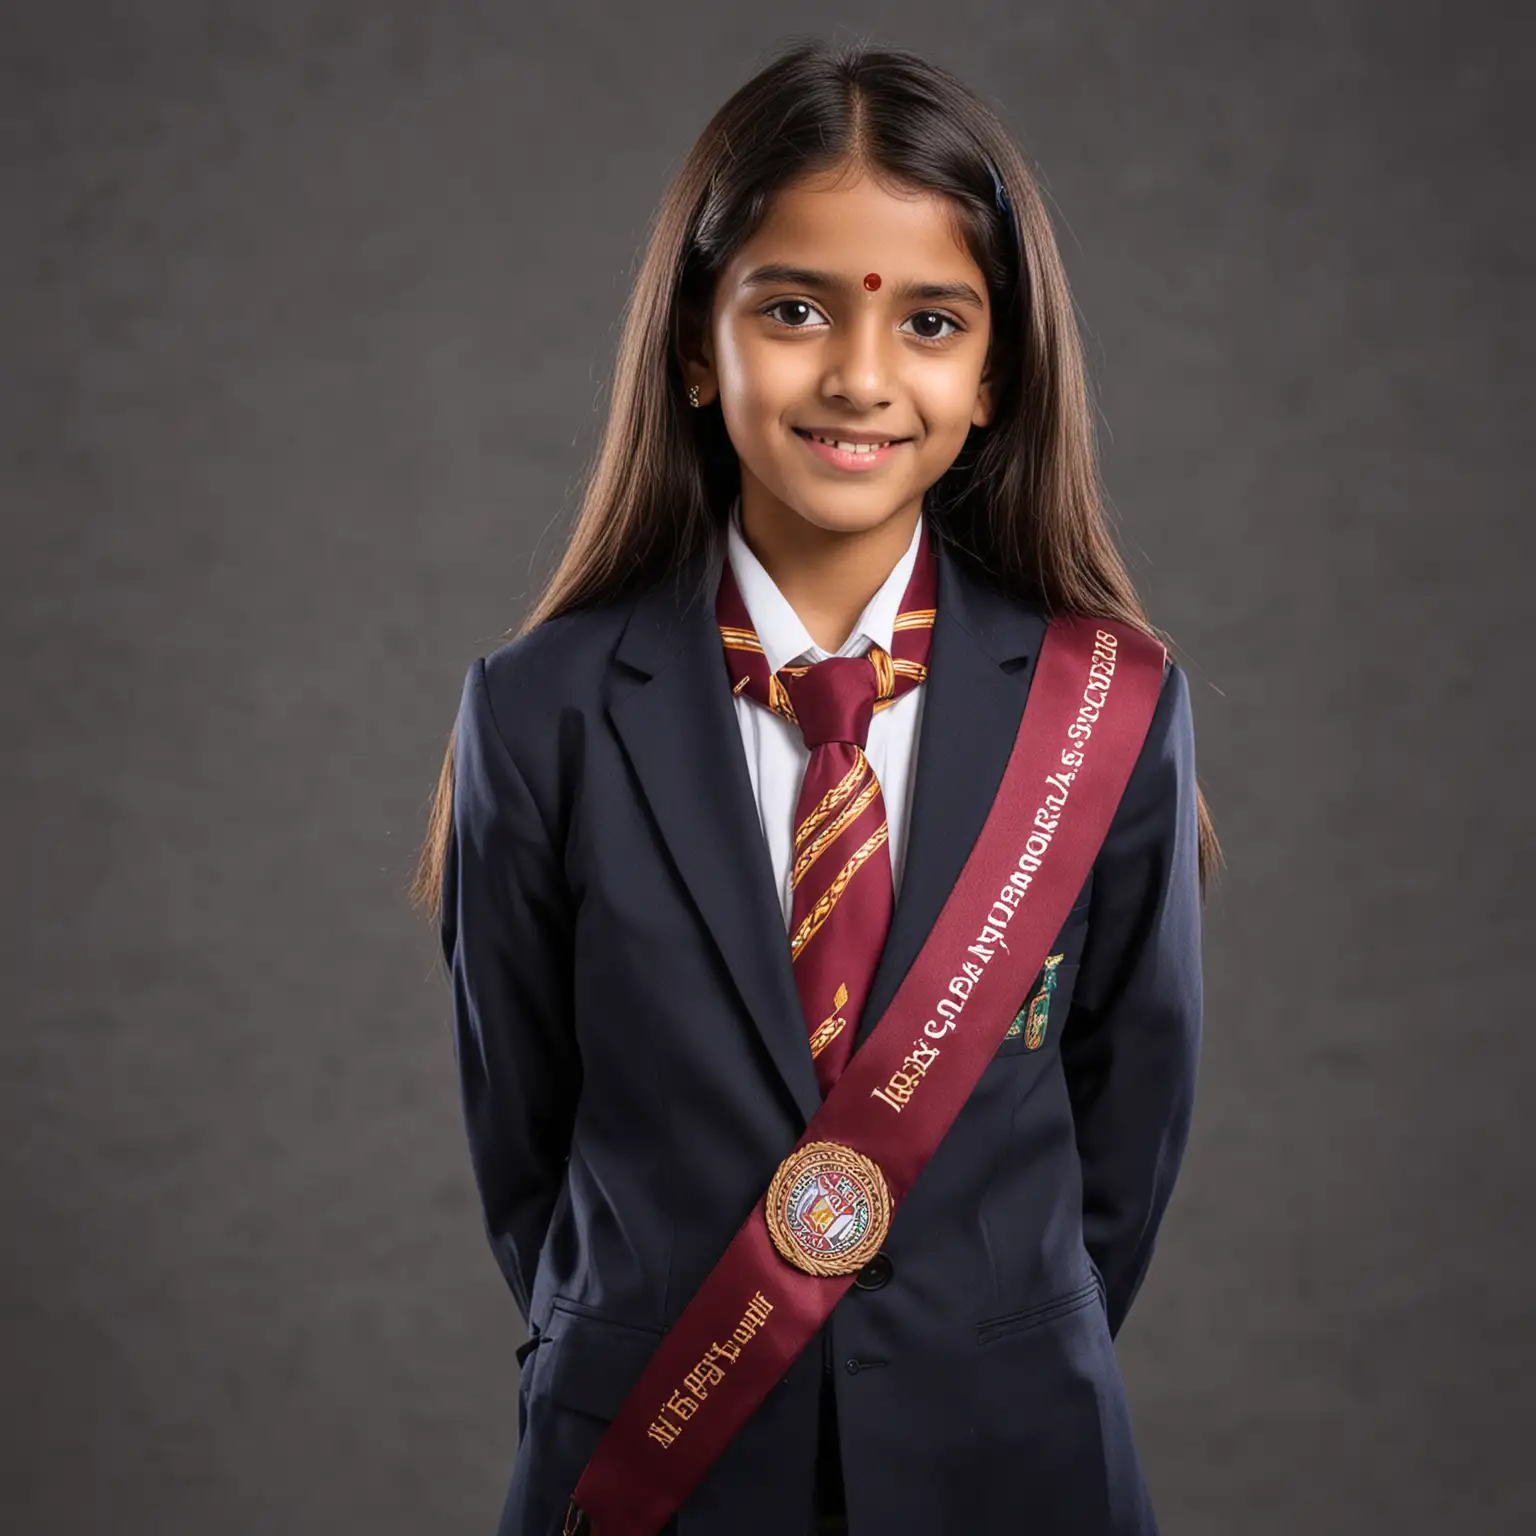 Indian Girl Student Wearing School Convocation Attire with Logo Accents